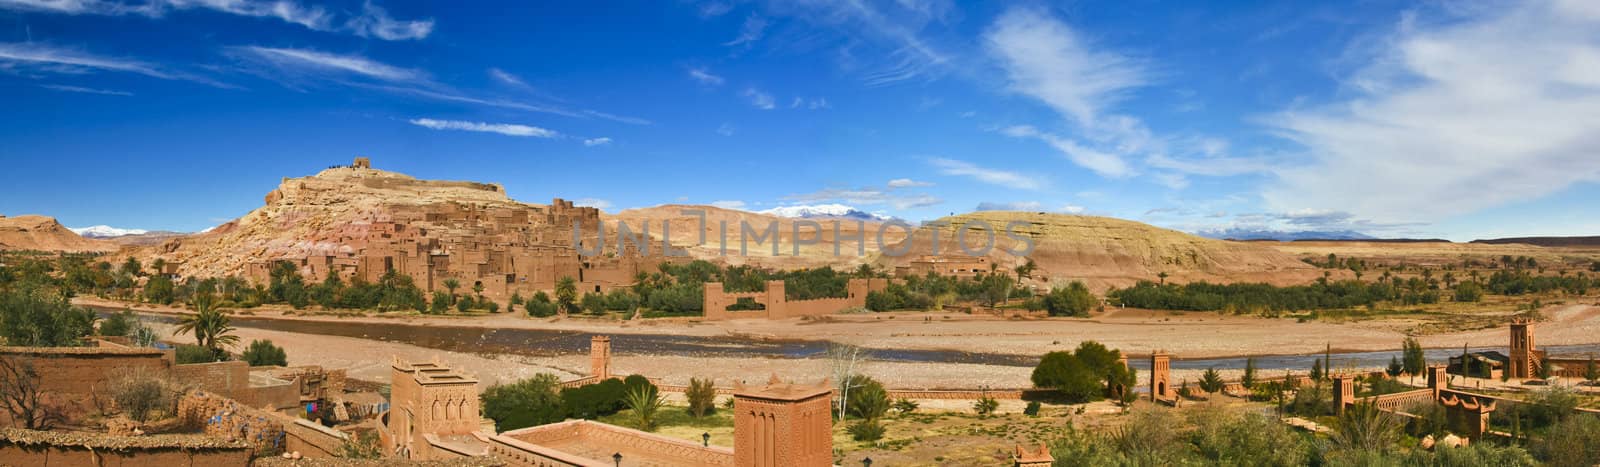 Ancient city of Ait Benhaddou in Morocco  by kasto